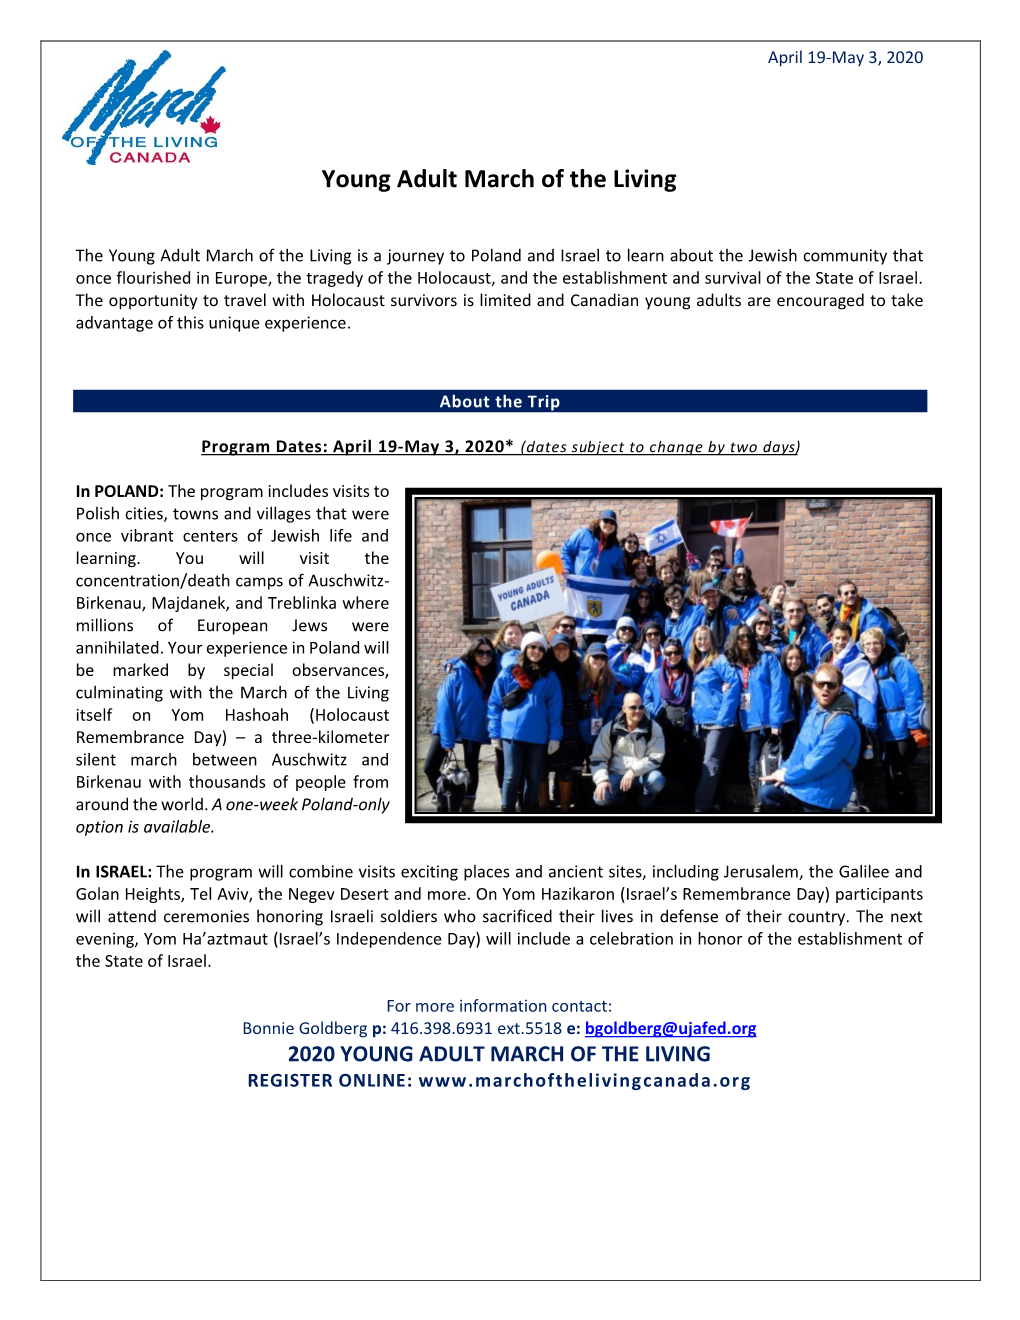 Young Adult March of the Living